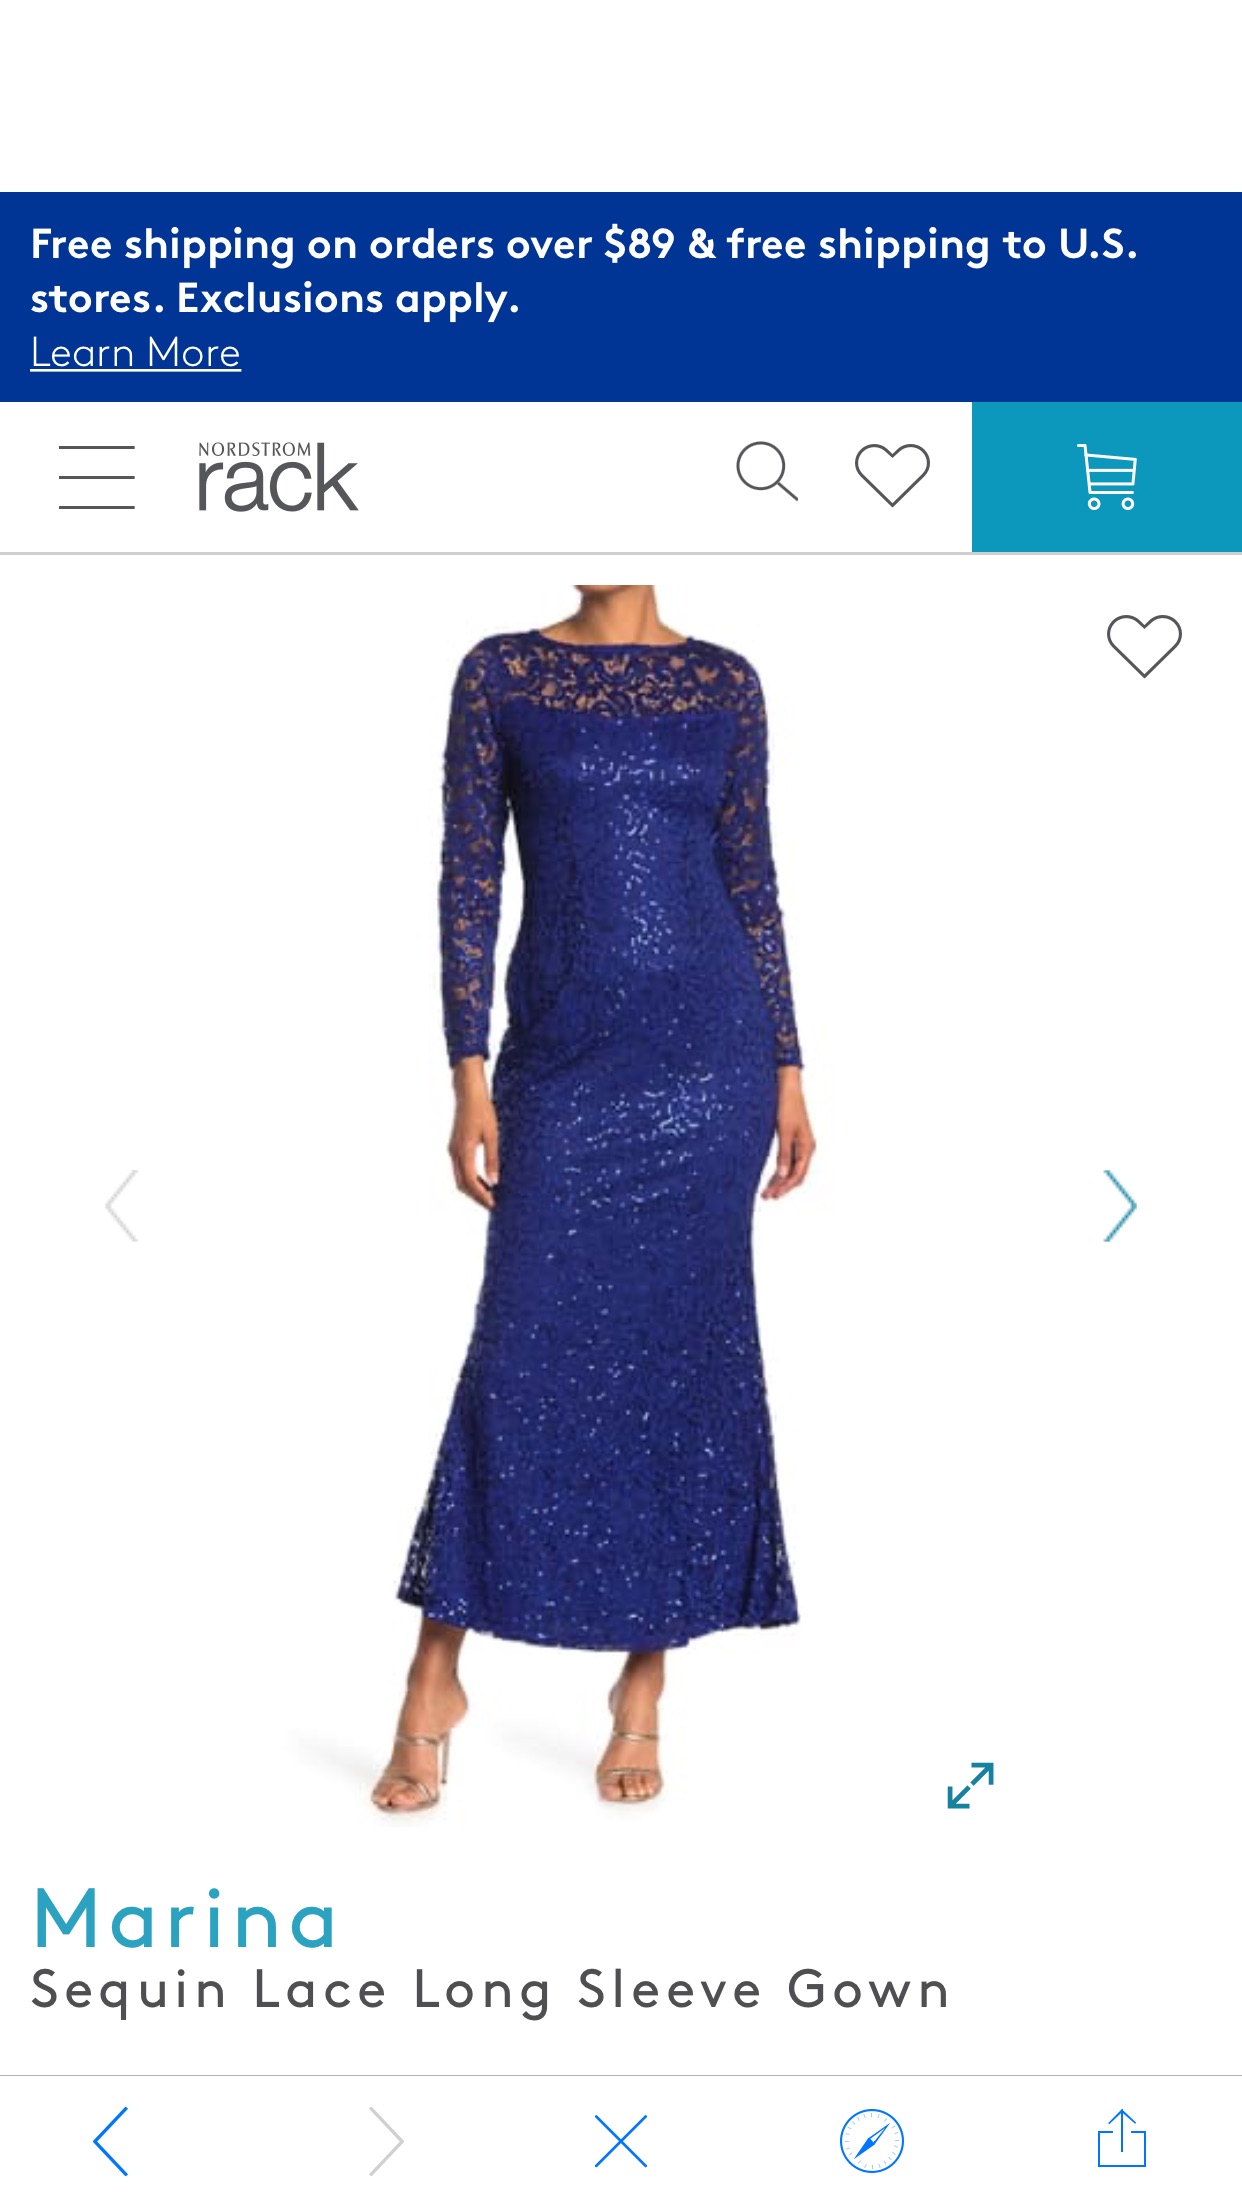 Marina | Sequin Lace Long Sleeve Gown | Nordstrom Rack
连衣裙